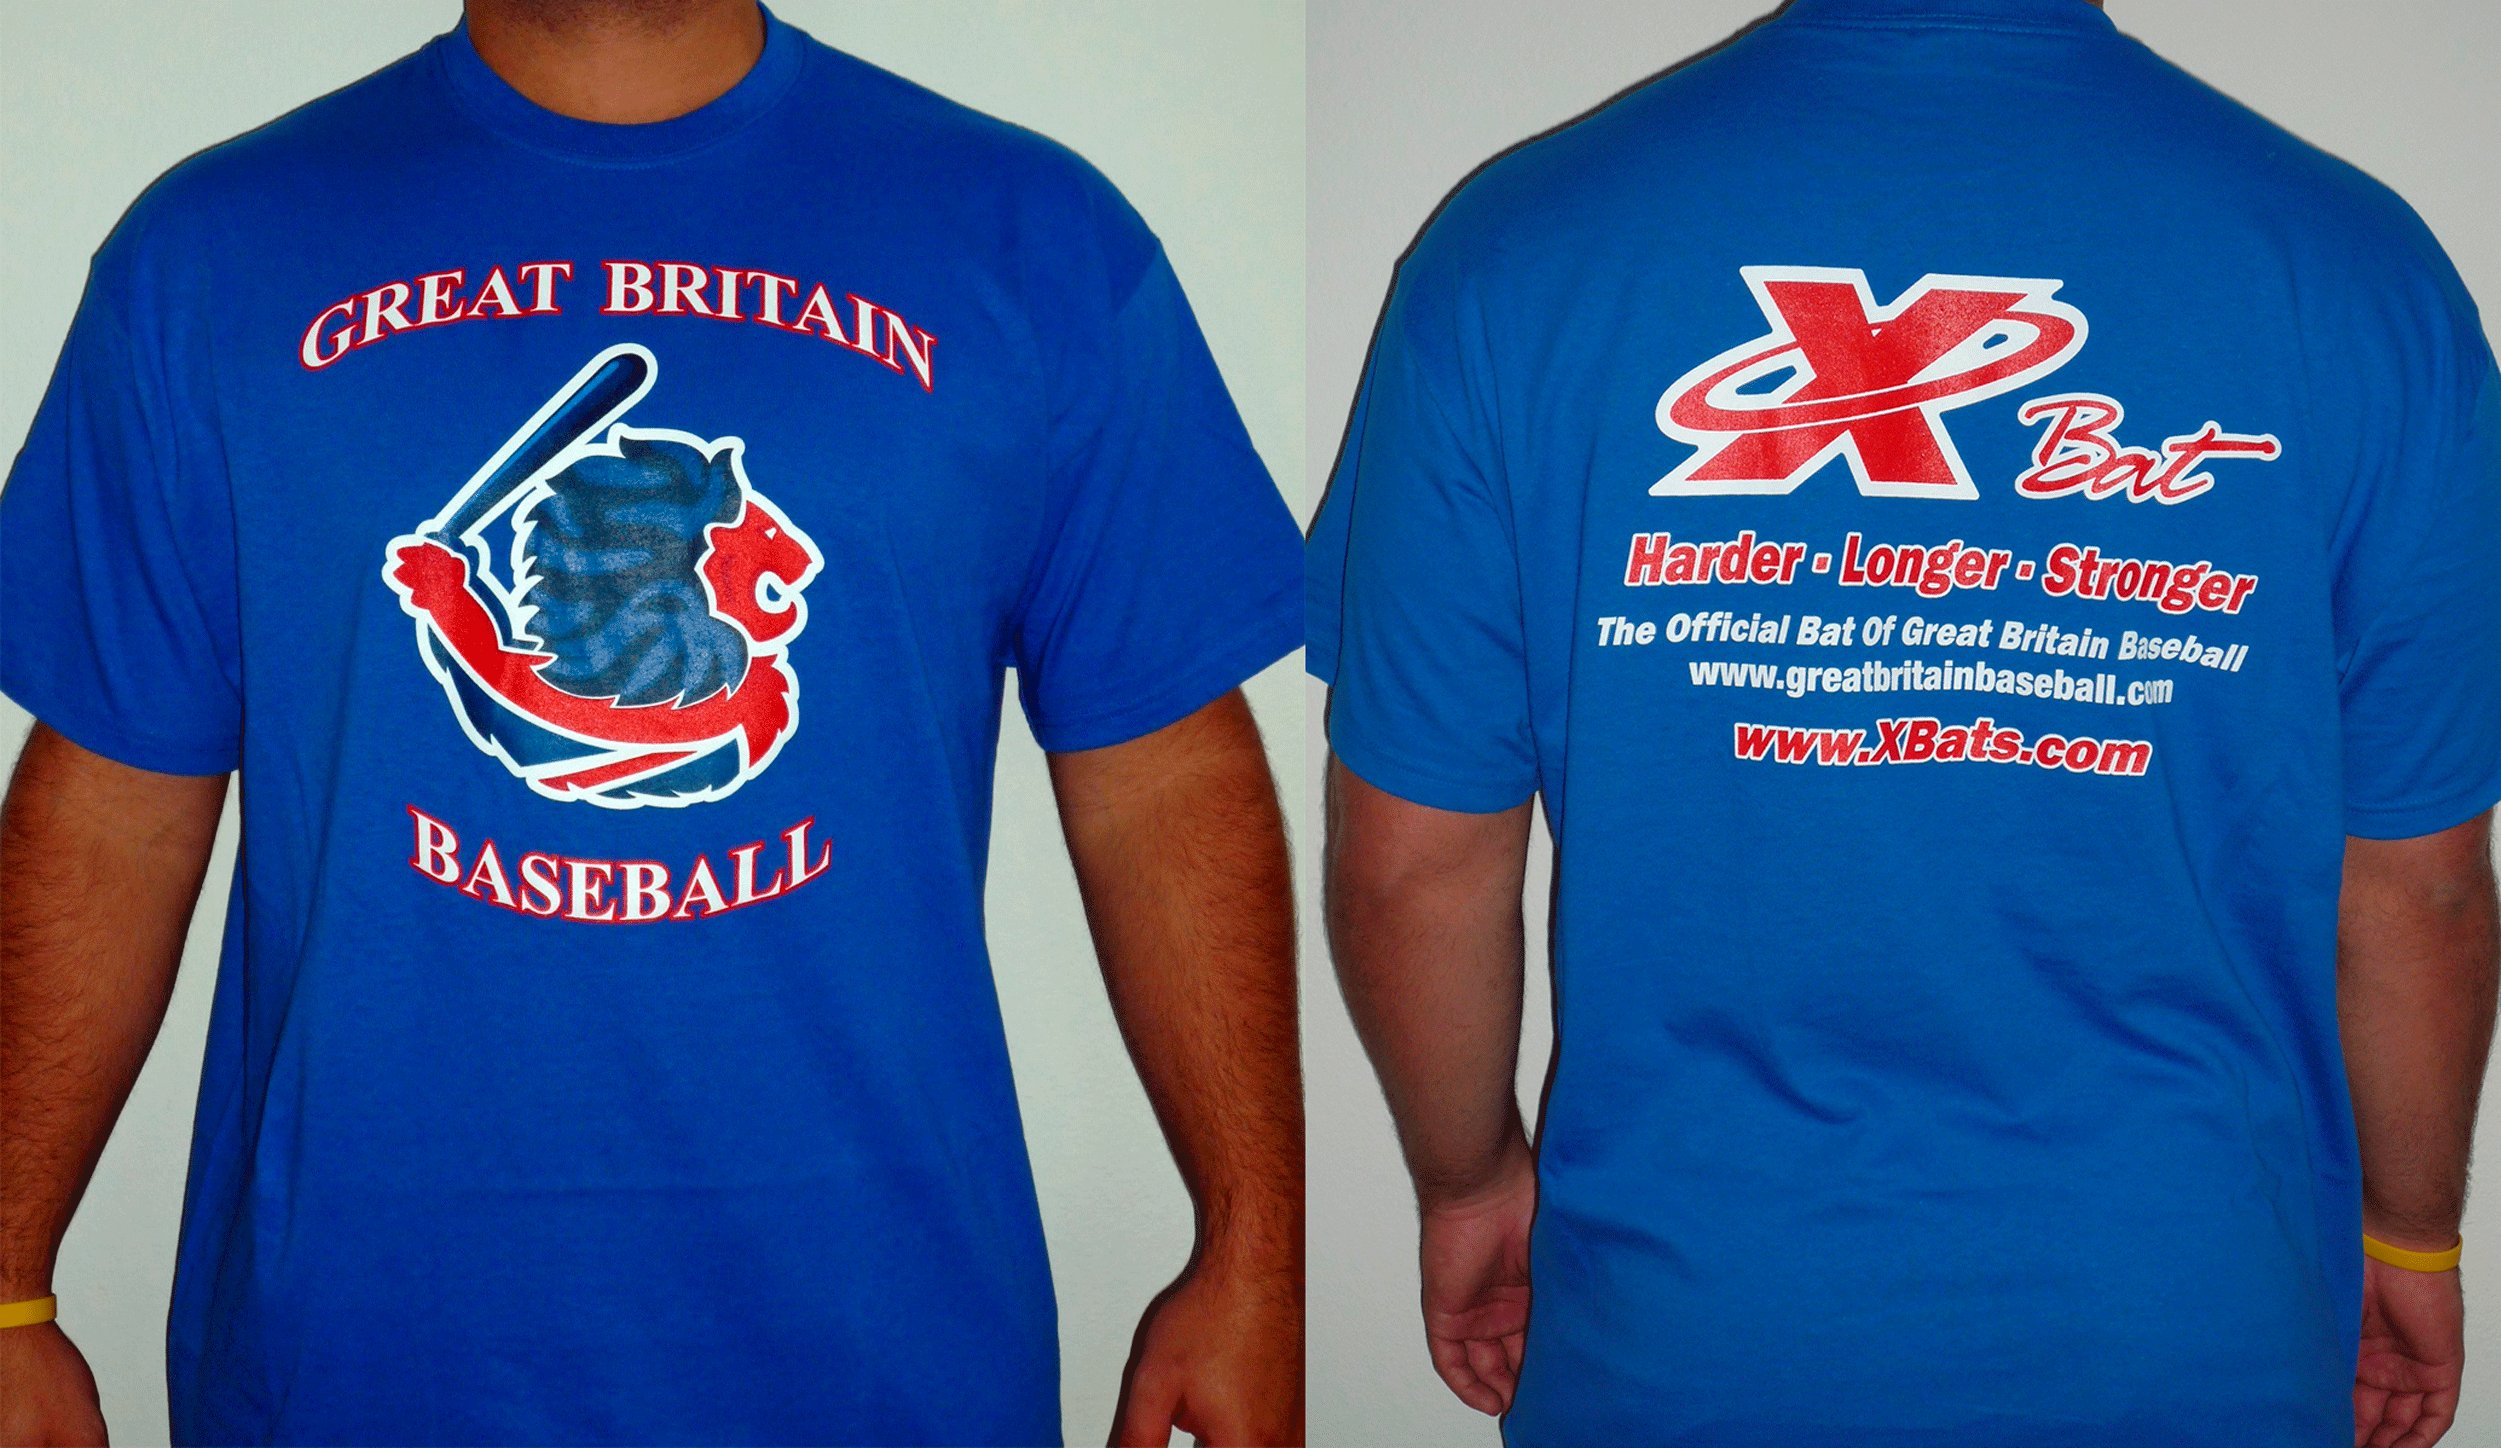 Team Great Britain Player's t-shirt